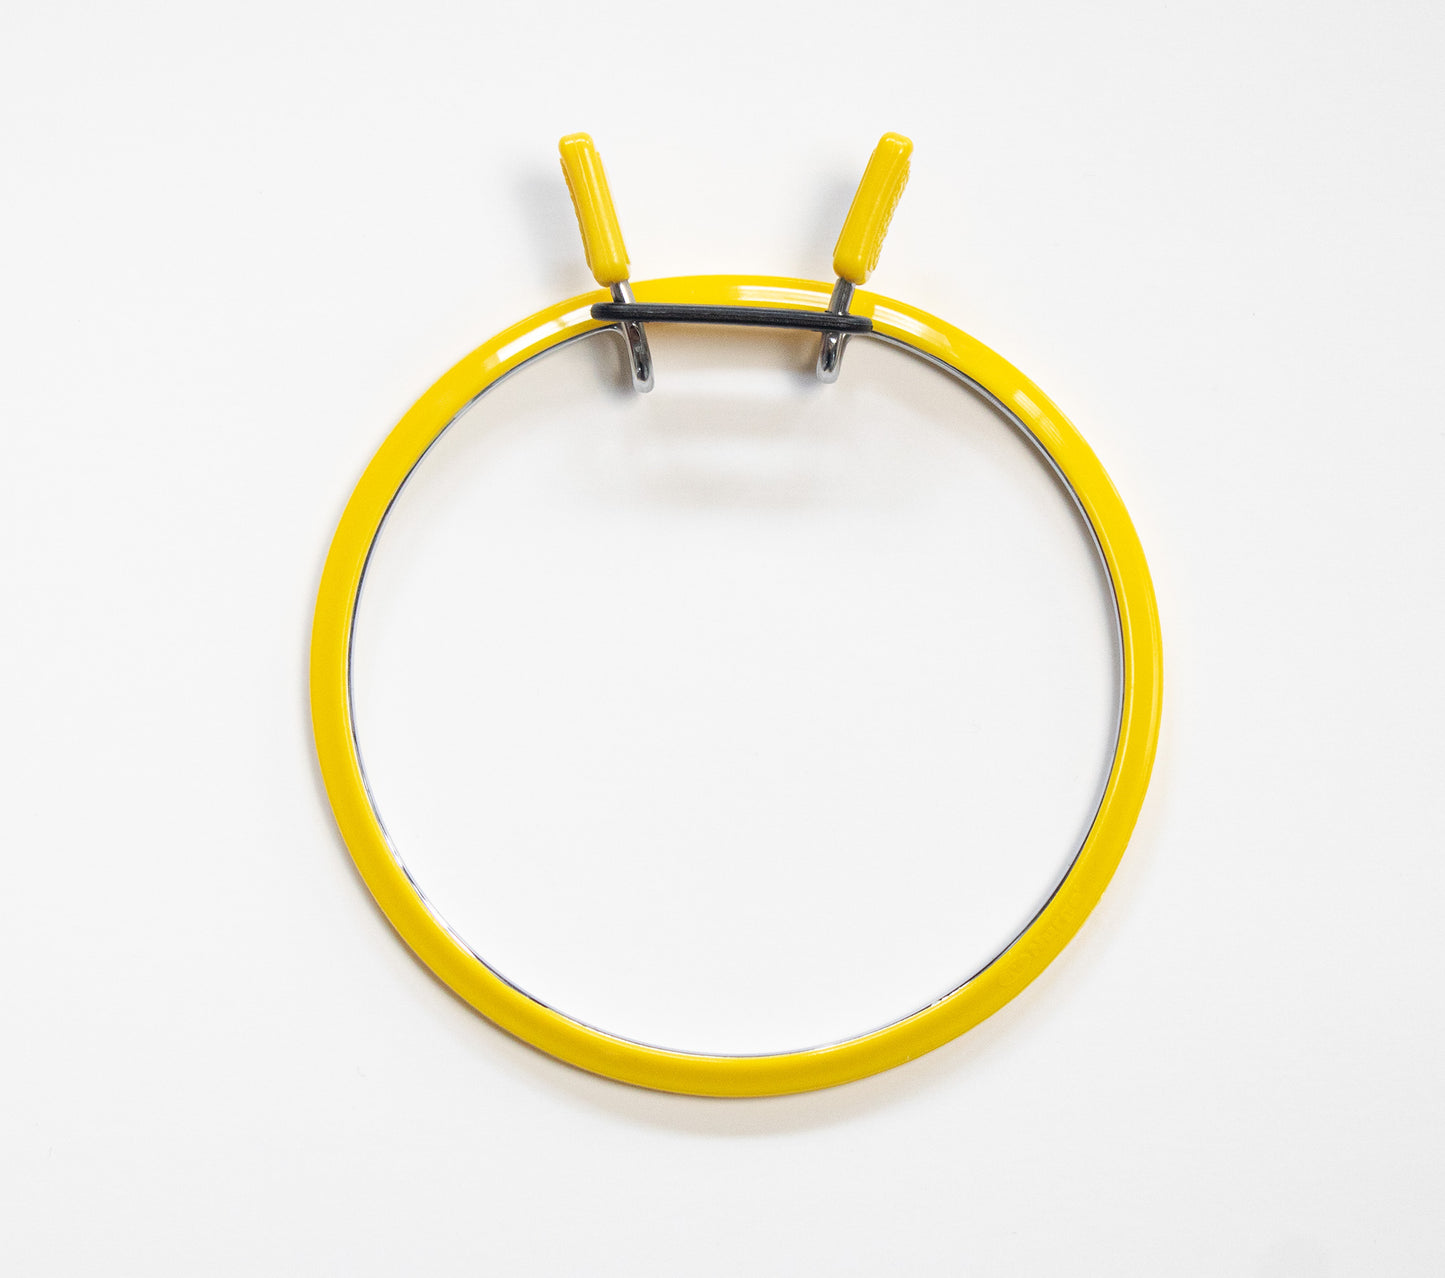 Embroidery Hoops - Nurge Tension Embroidery Hoops, Round